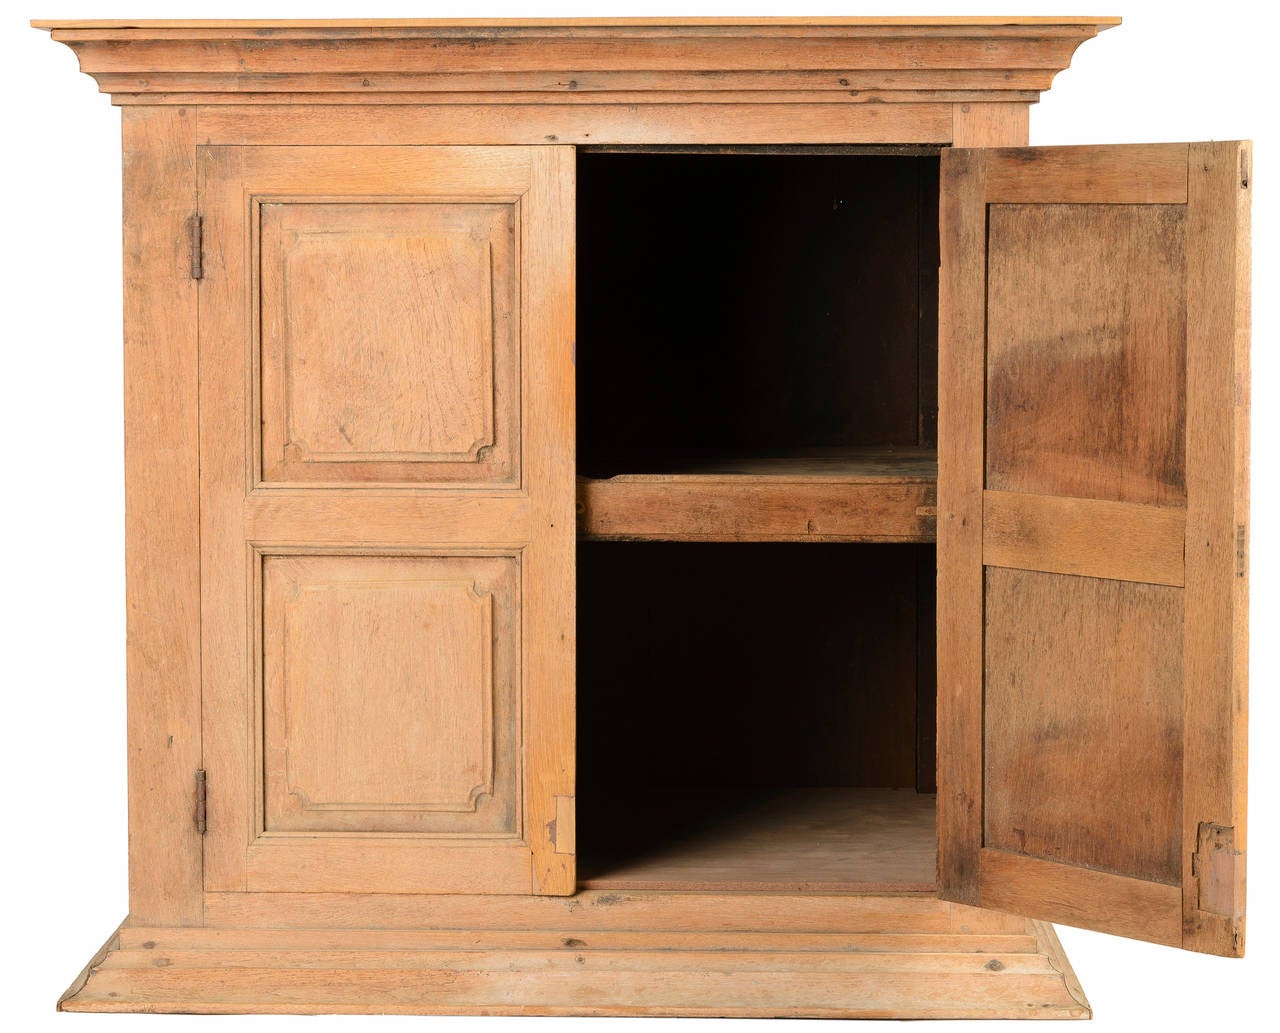 This is a hanging cabinet. The cabinet has wide moldings on top and base. The doors have raised panel with cut corner and bead detail. This piece offers great storage for a kitchen or pantry. A full top piece was added to have a solid shelf.